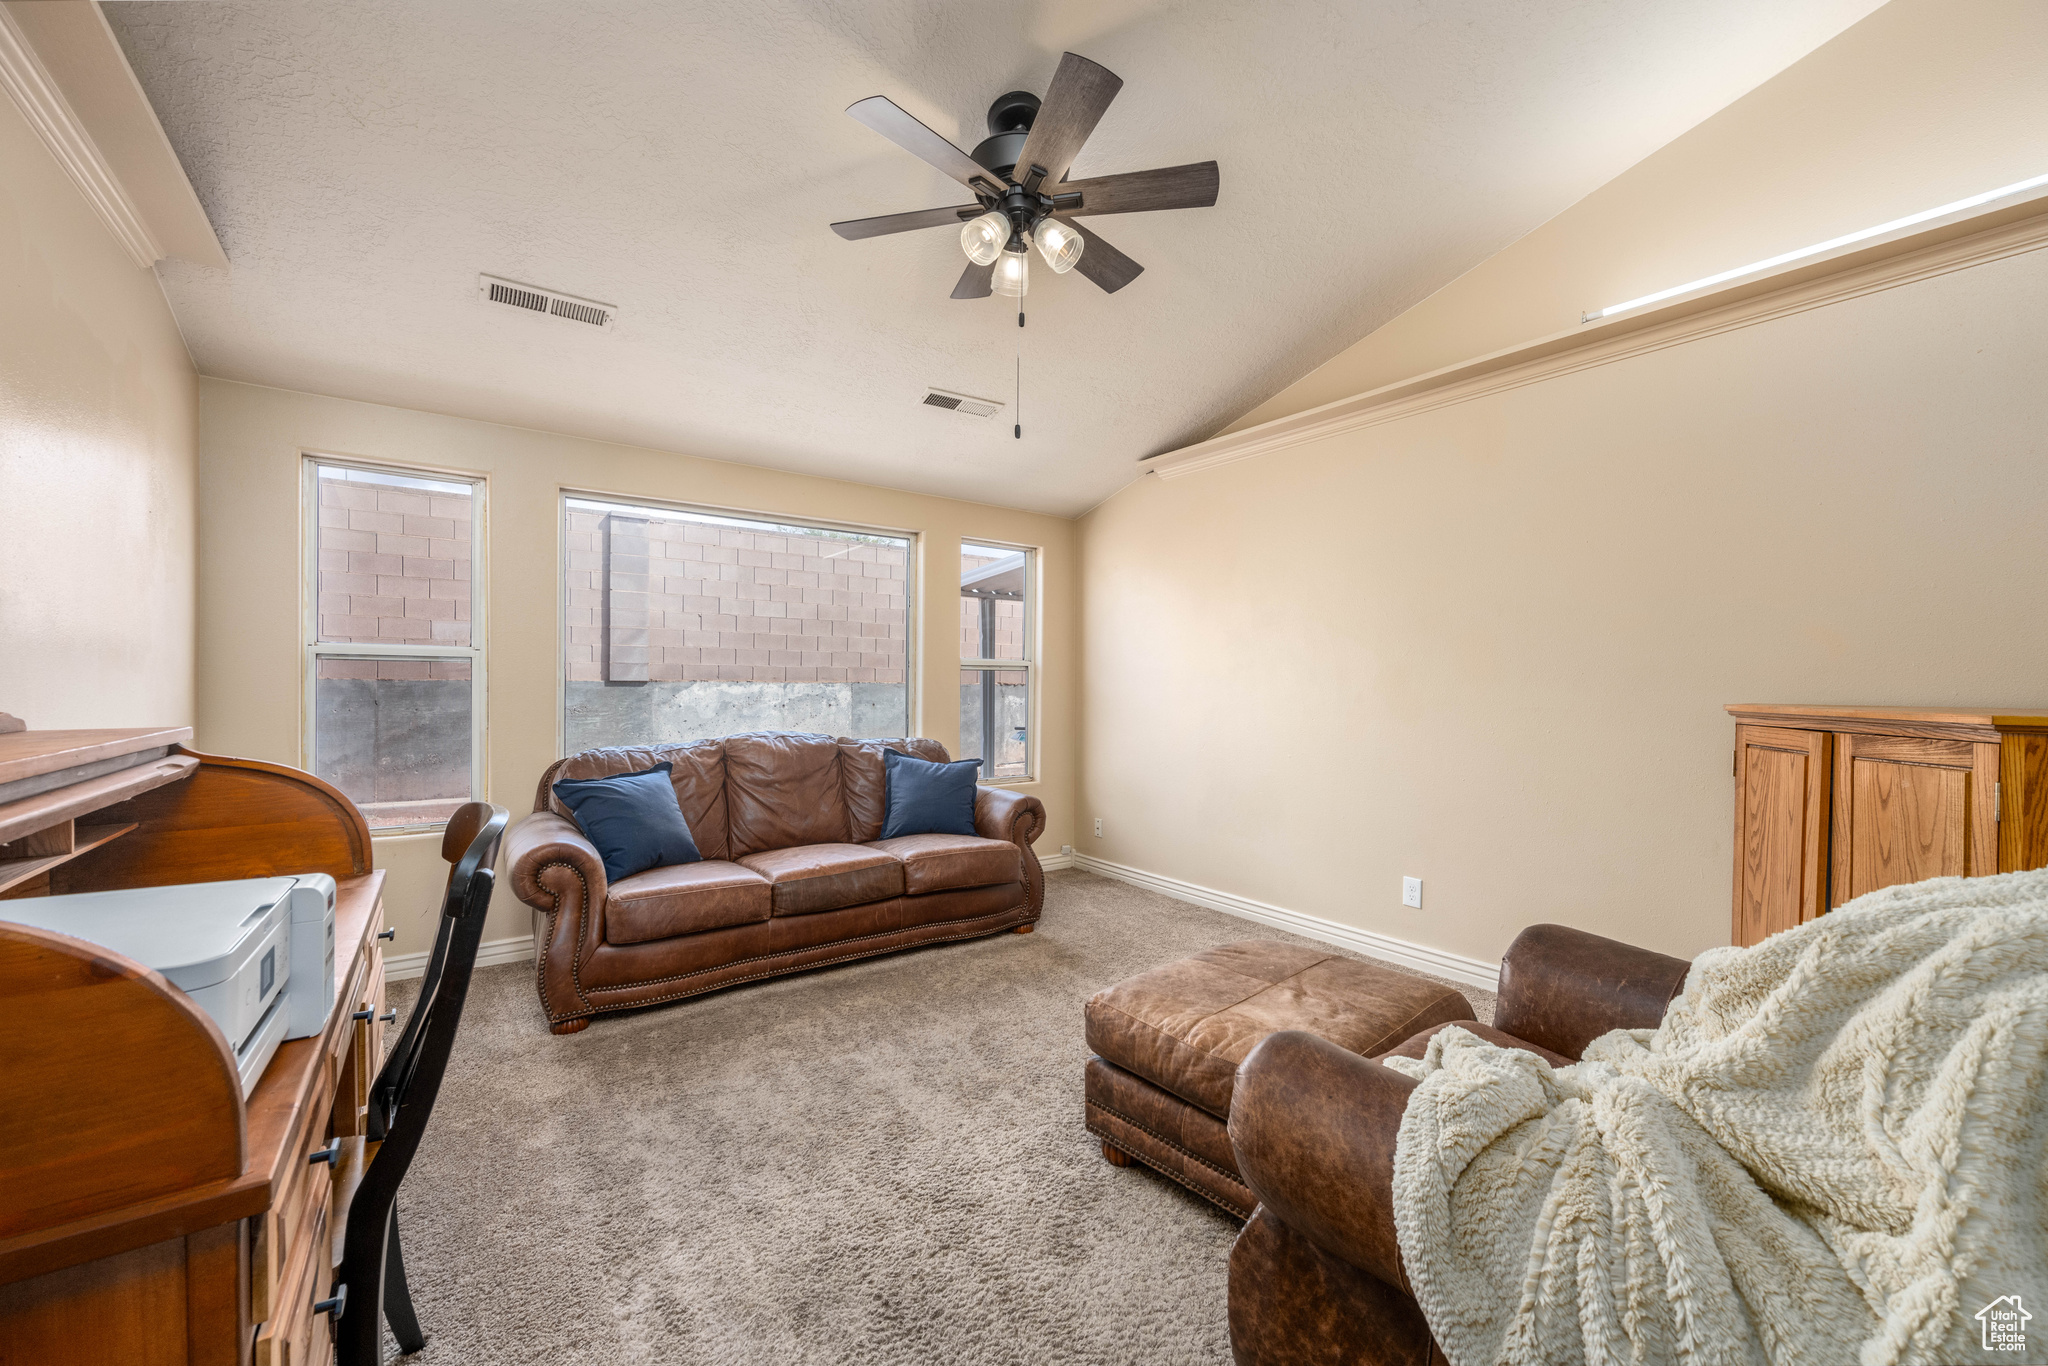 Carpeted living room featuring ceiling fan and vaulted ceiling